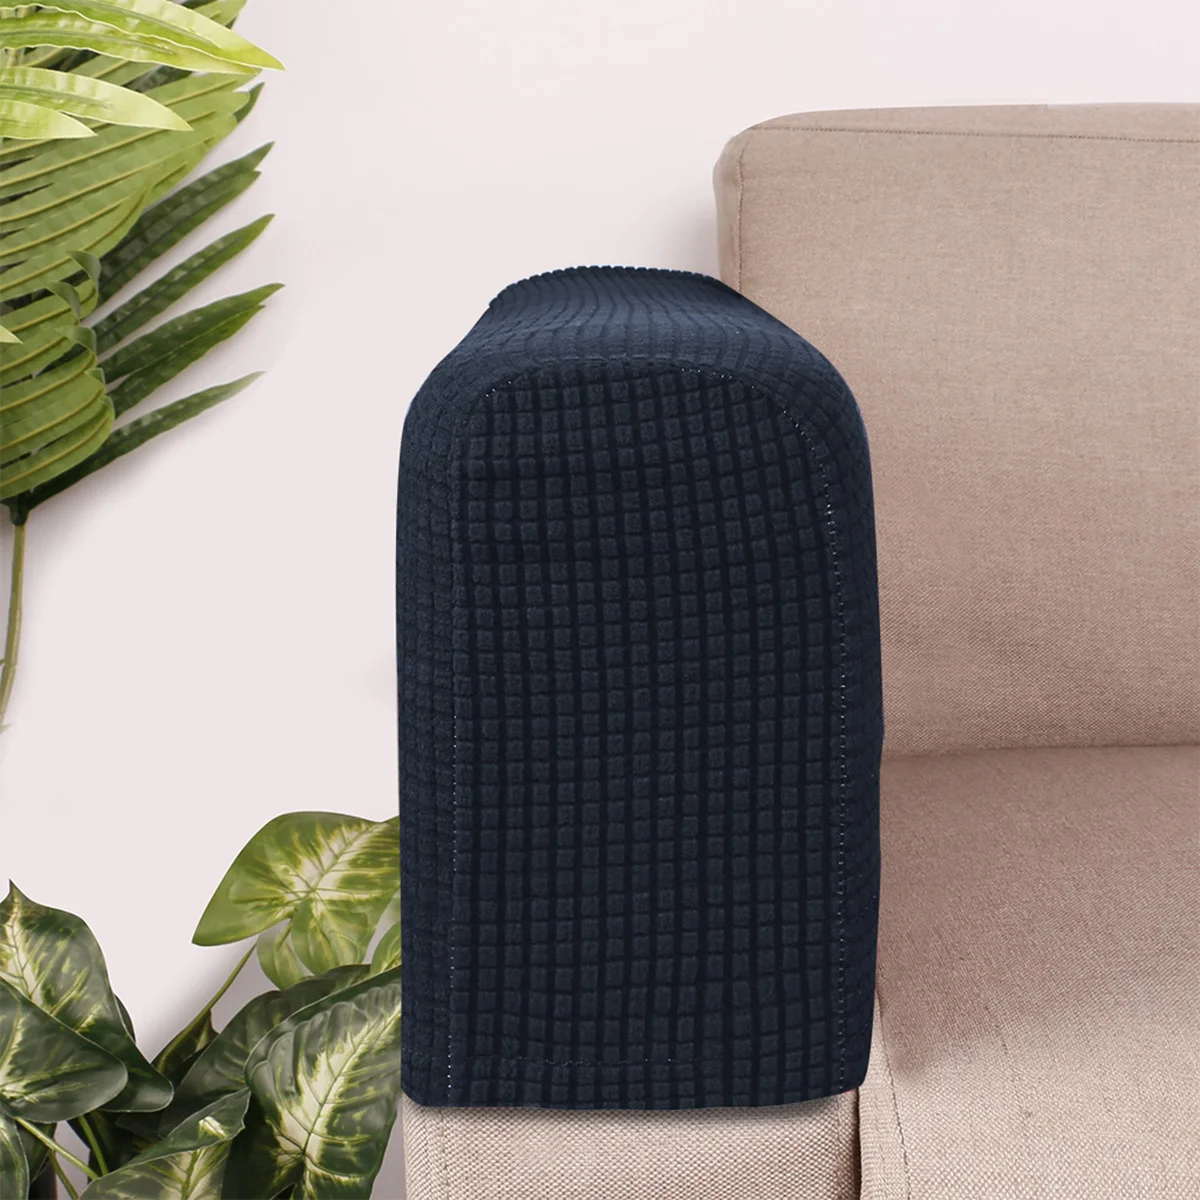 

Arm Armrest Sofa Covers Cover Armchairchair Couch Protector Protectors Stretch Slipcover Towel Chairs Rest Slipcovers